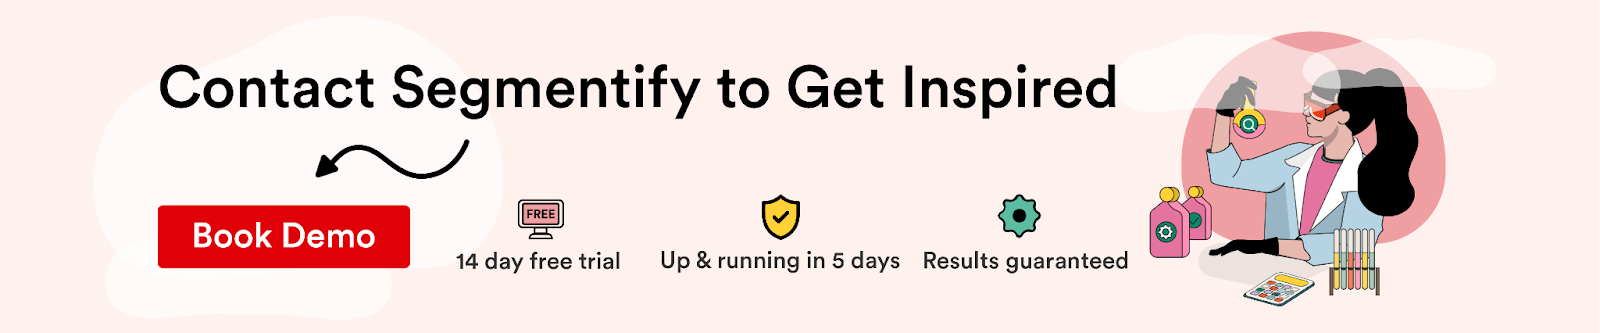 “Contact Segmentify to Get Inspired” banner with a “Book Demo” button.